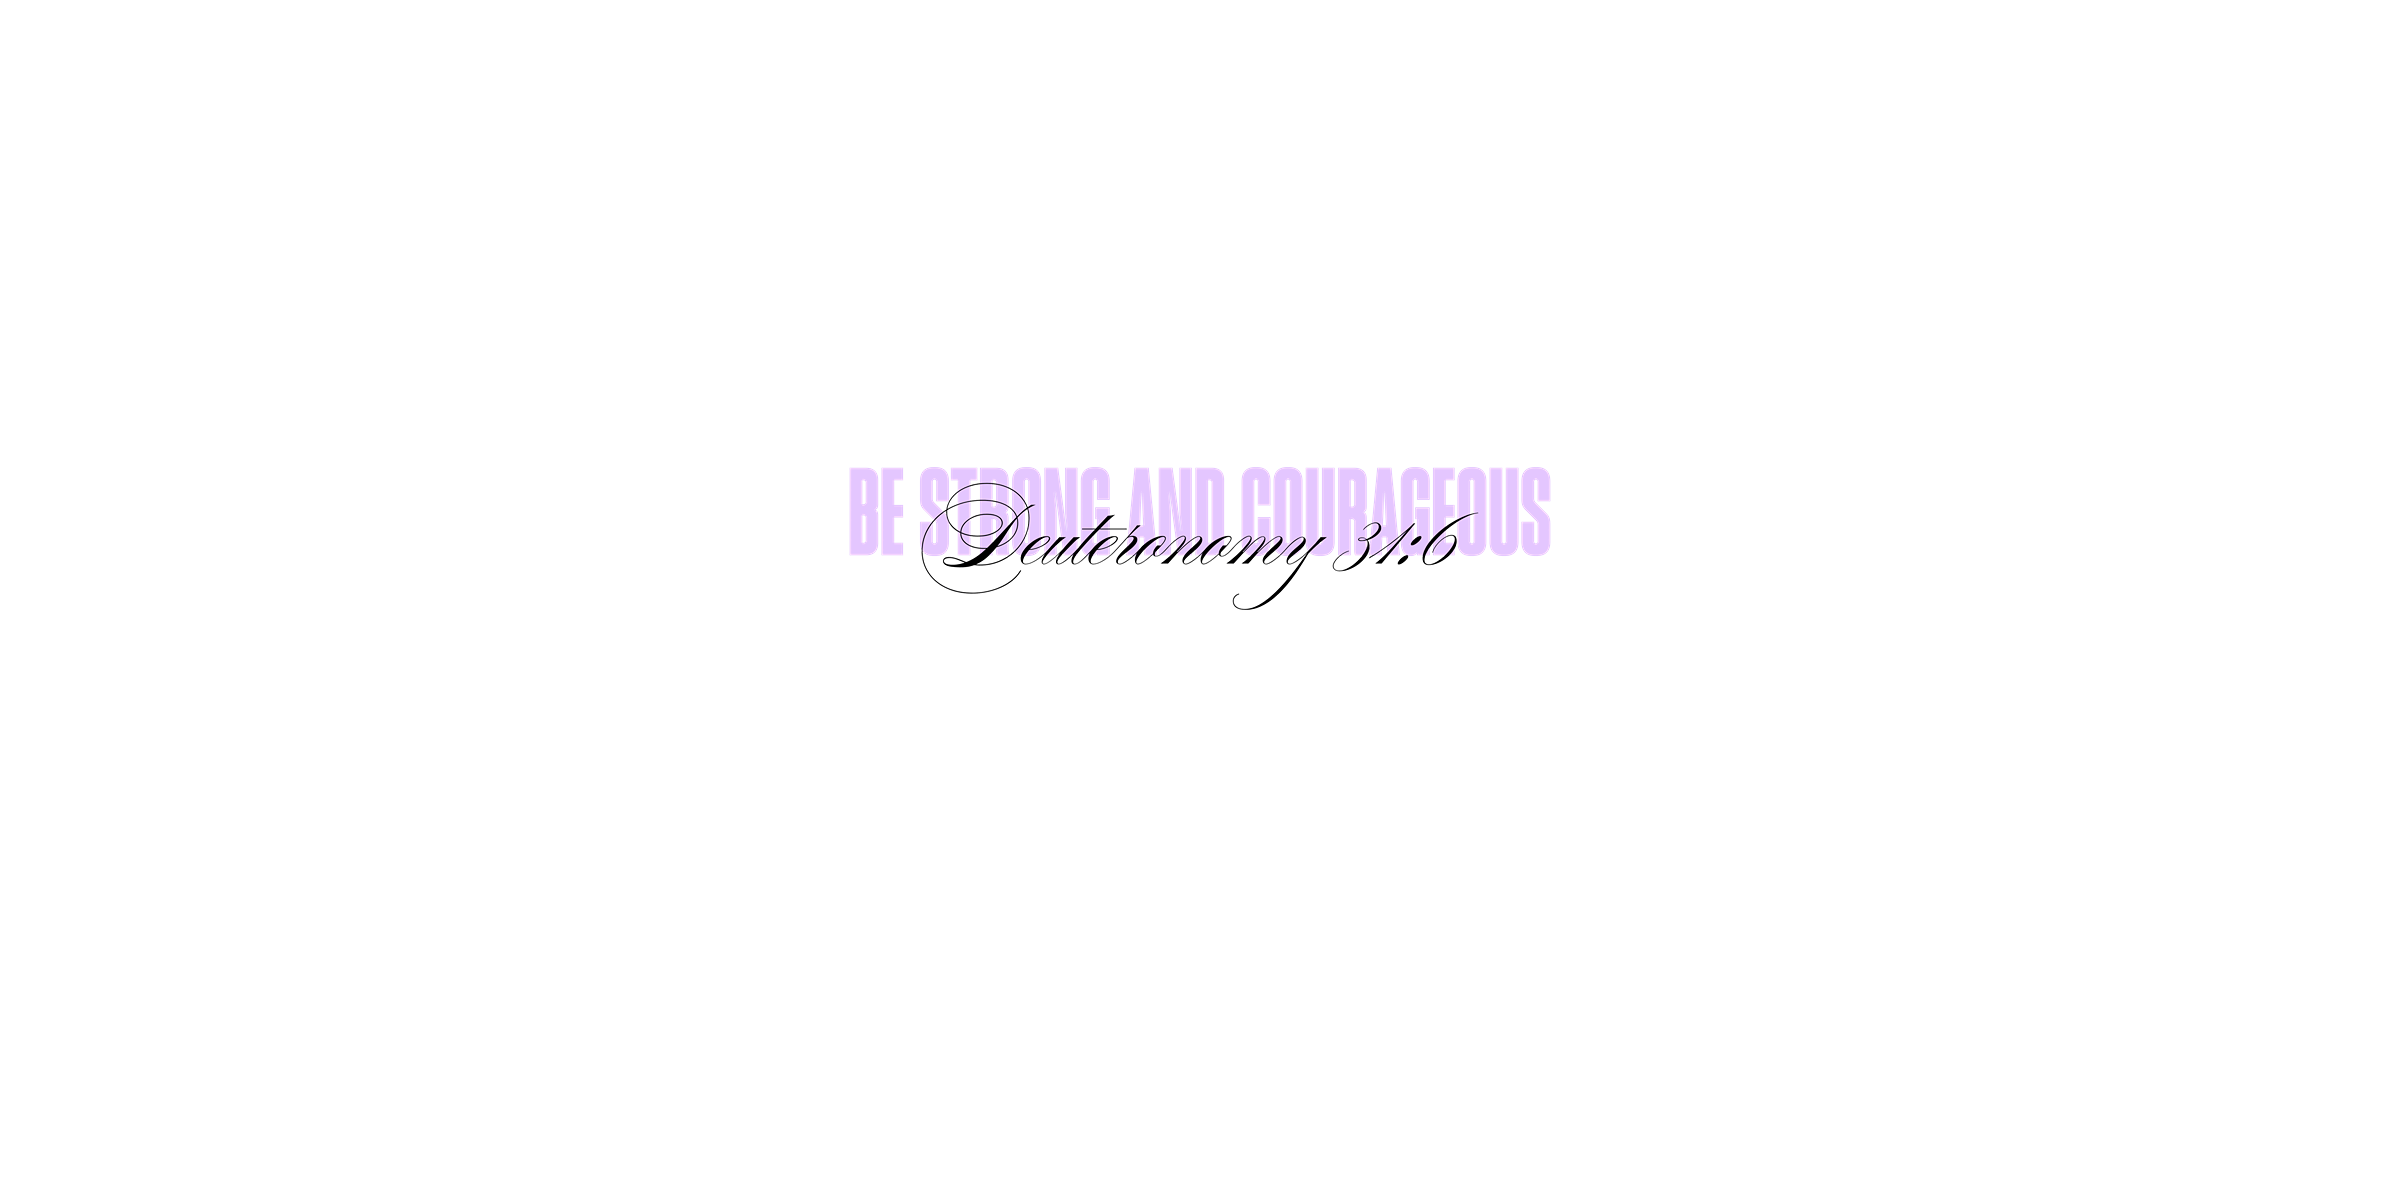 Deuteronomy 31:6 - Be Strong and Courageous